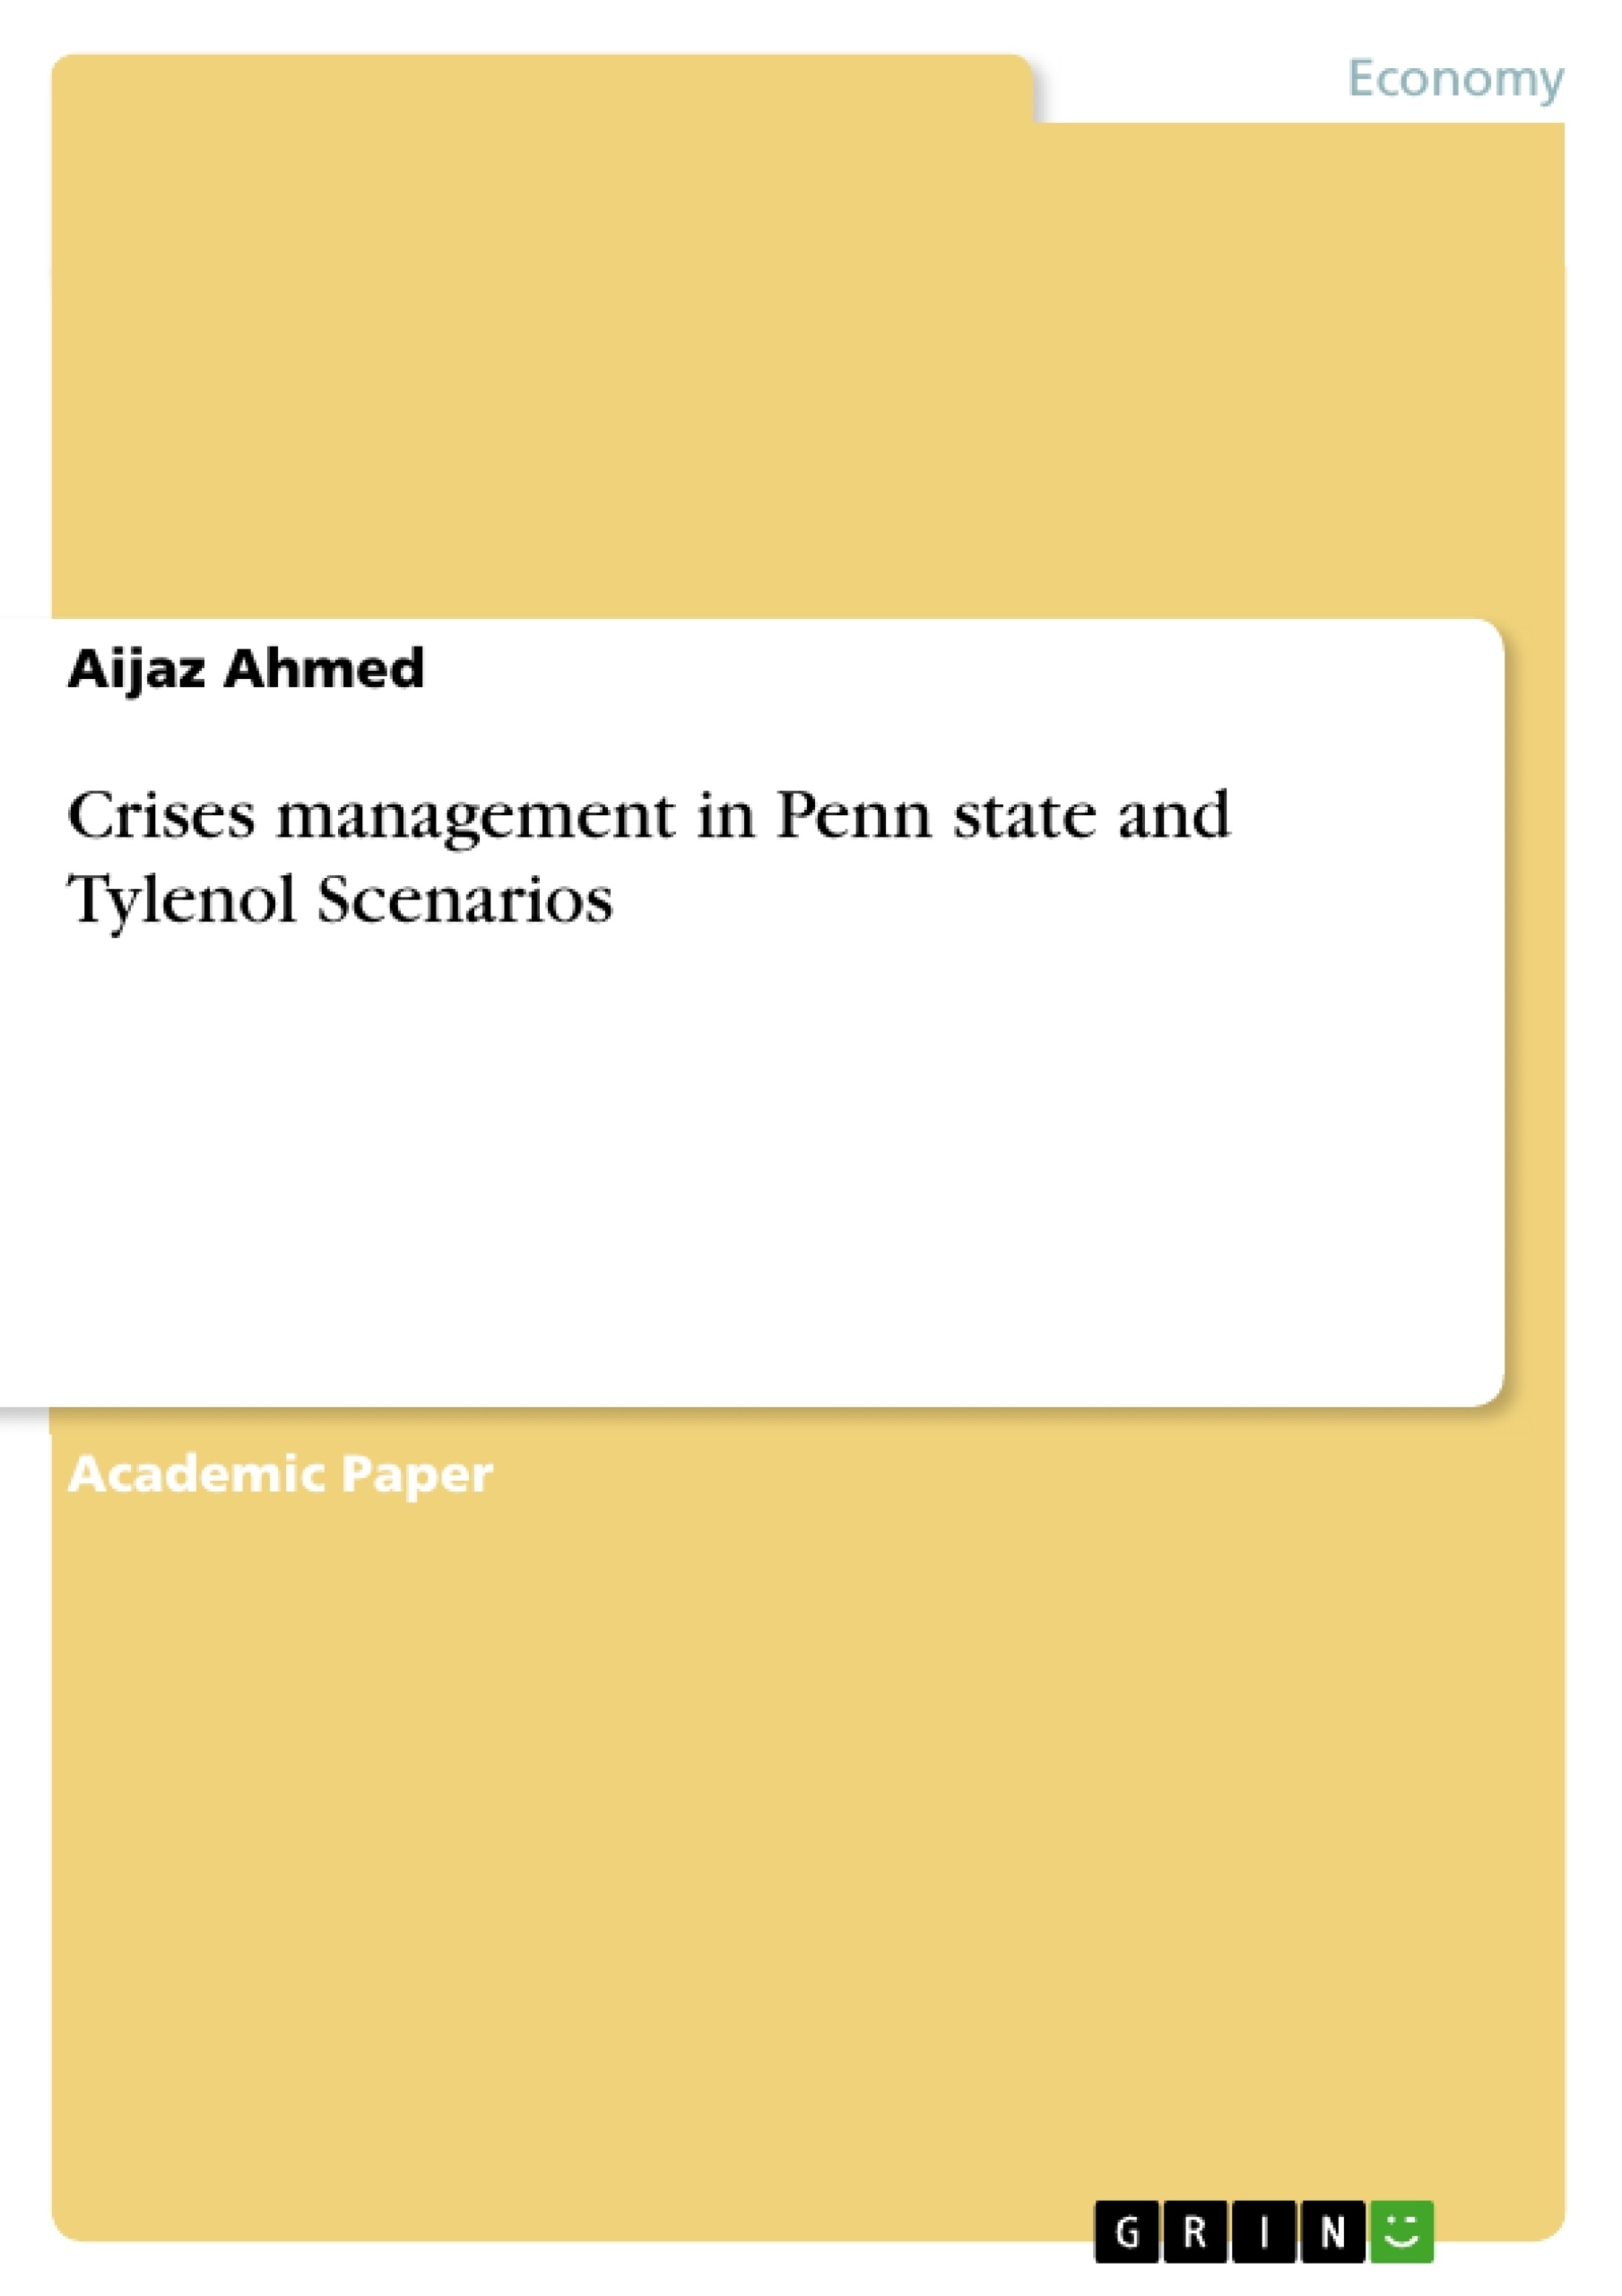 Title: Crises management in Penn state and Tylenol Scenarios